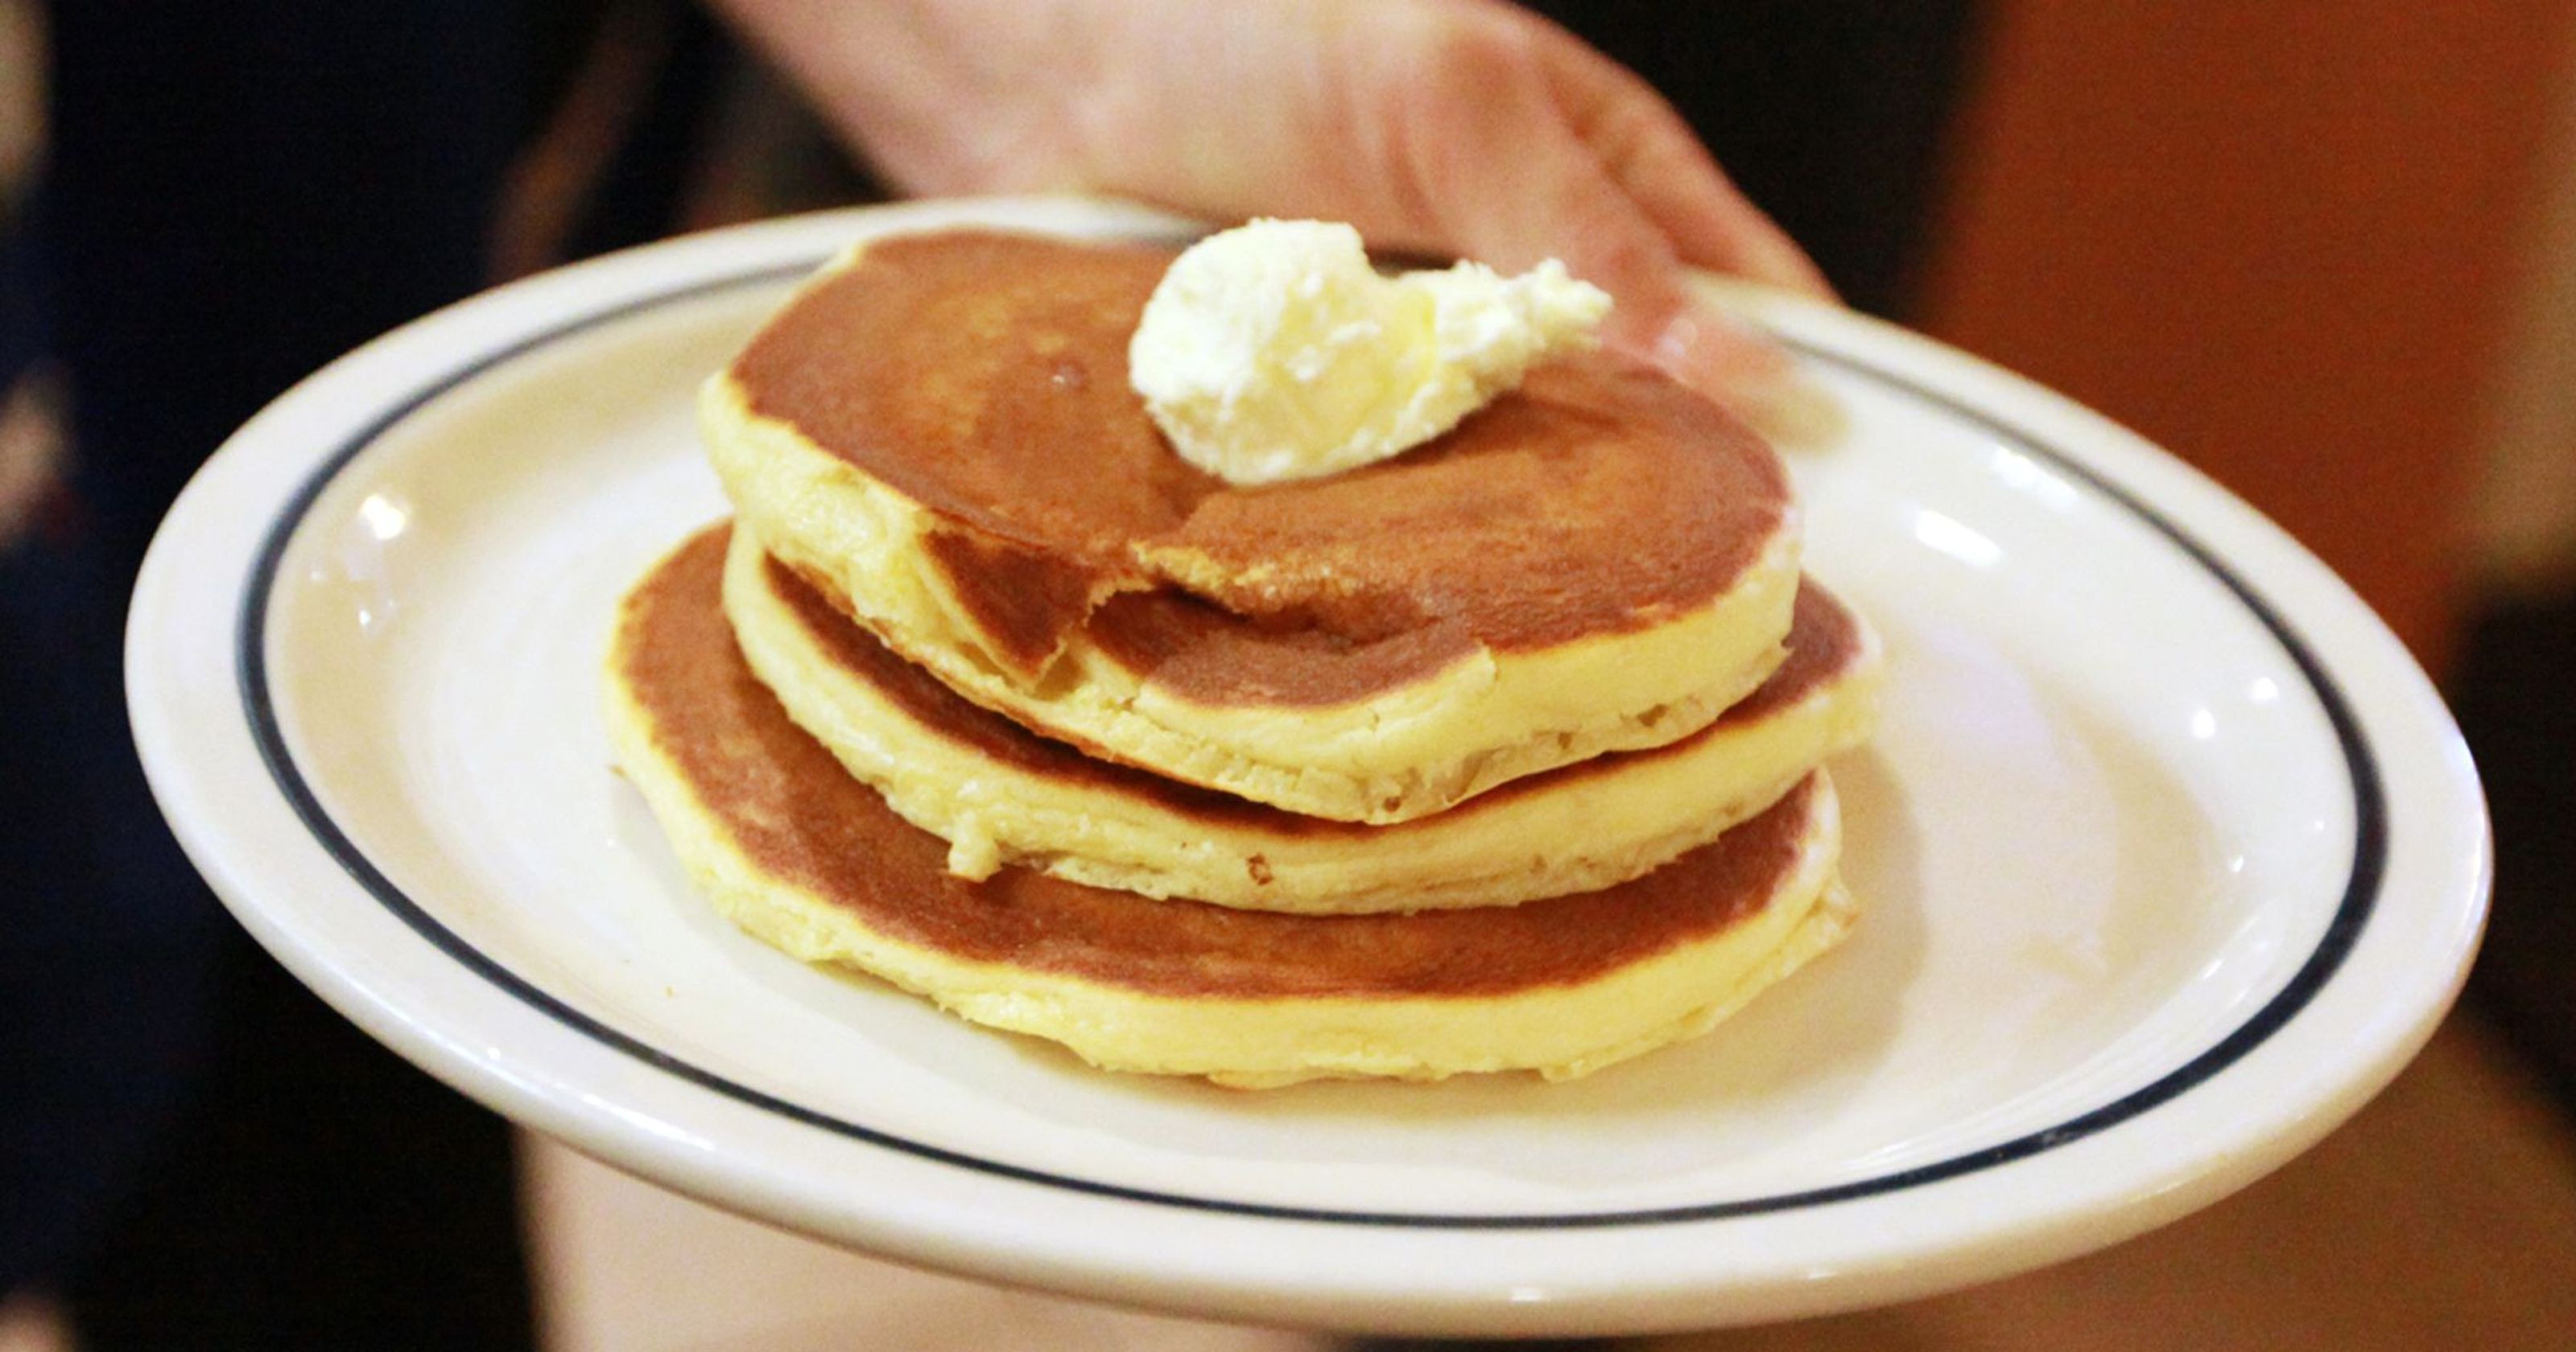 Ihop 60 Cent Pancakes
 IHOP has a 60 cent pancake deal for 60th anniversary Tuesday